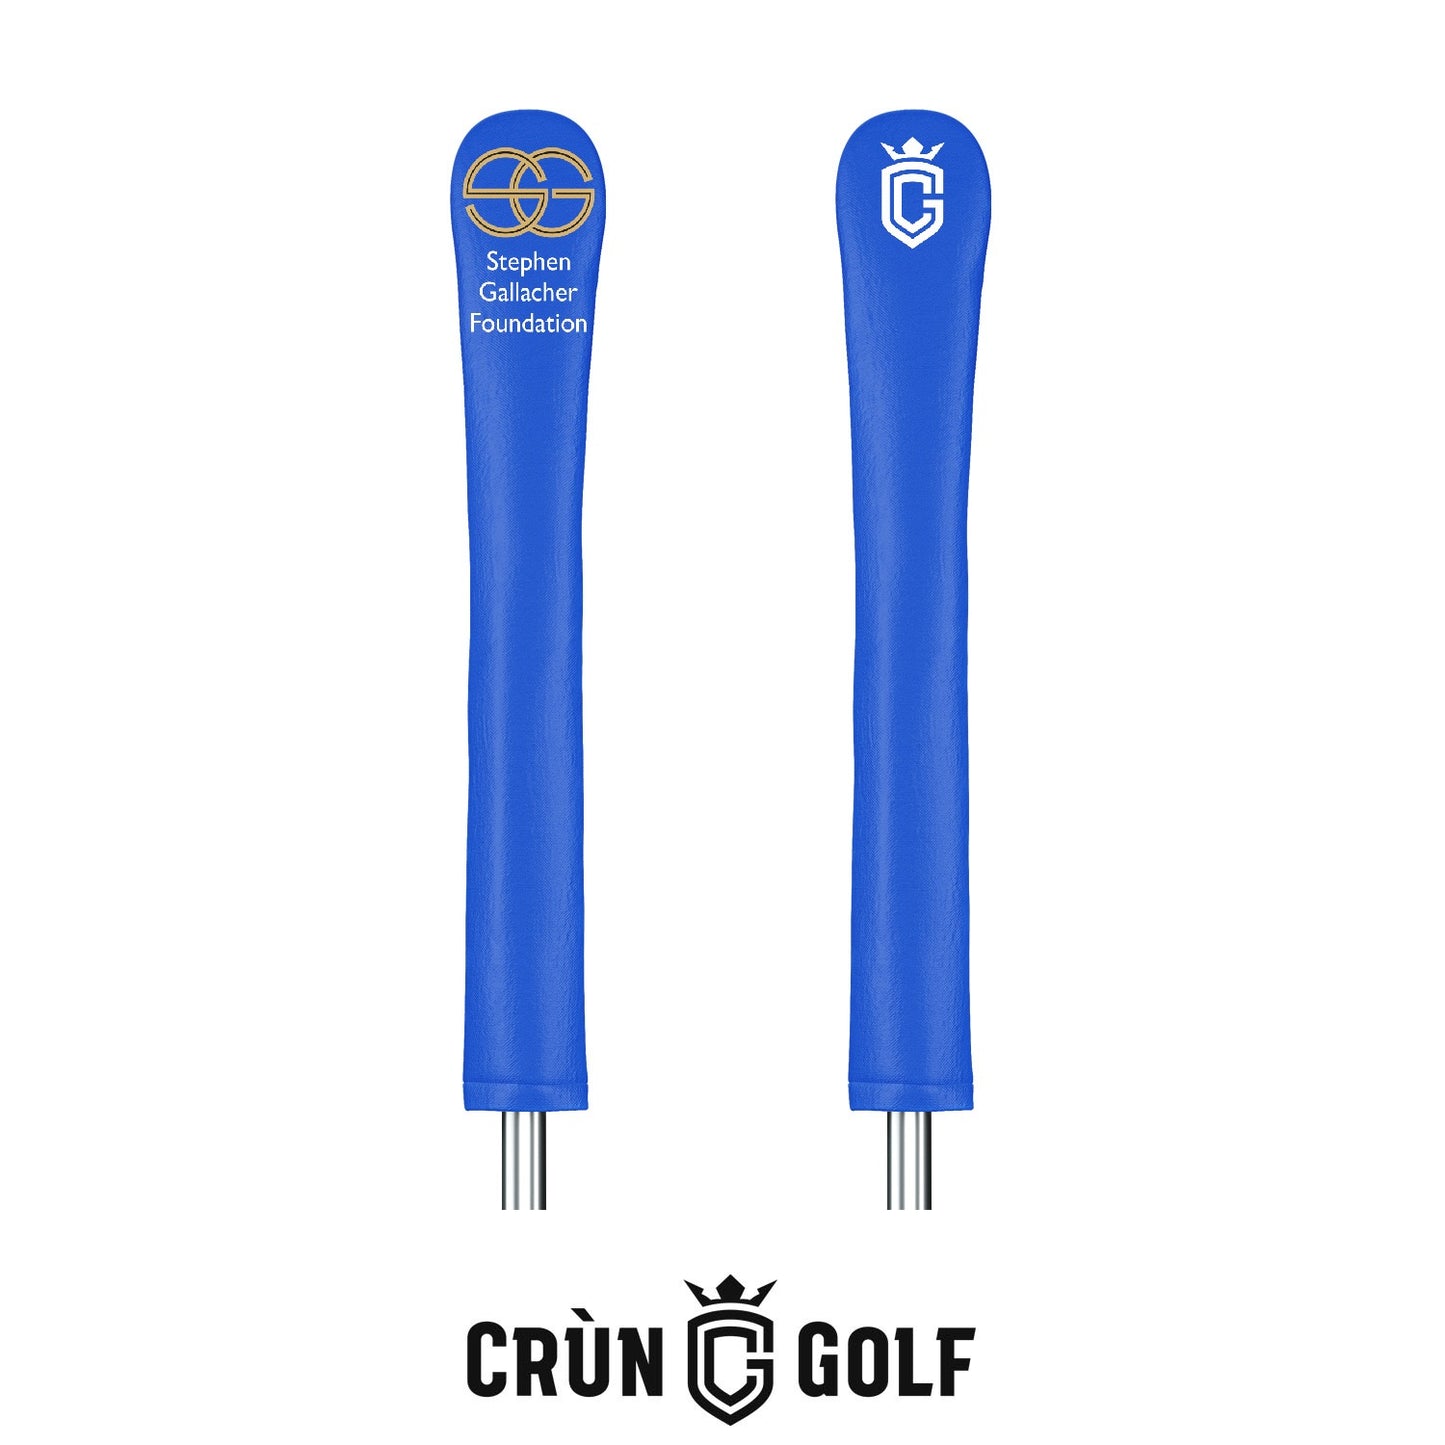 Stephen Gallacher Foundation Alignment Stick Cover - Royal